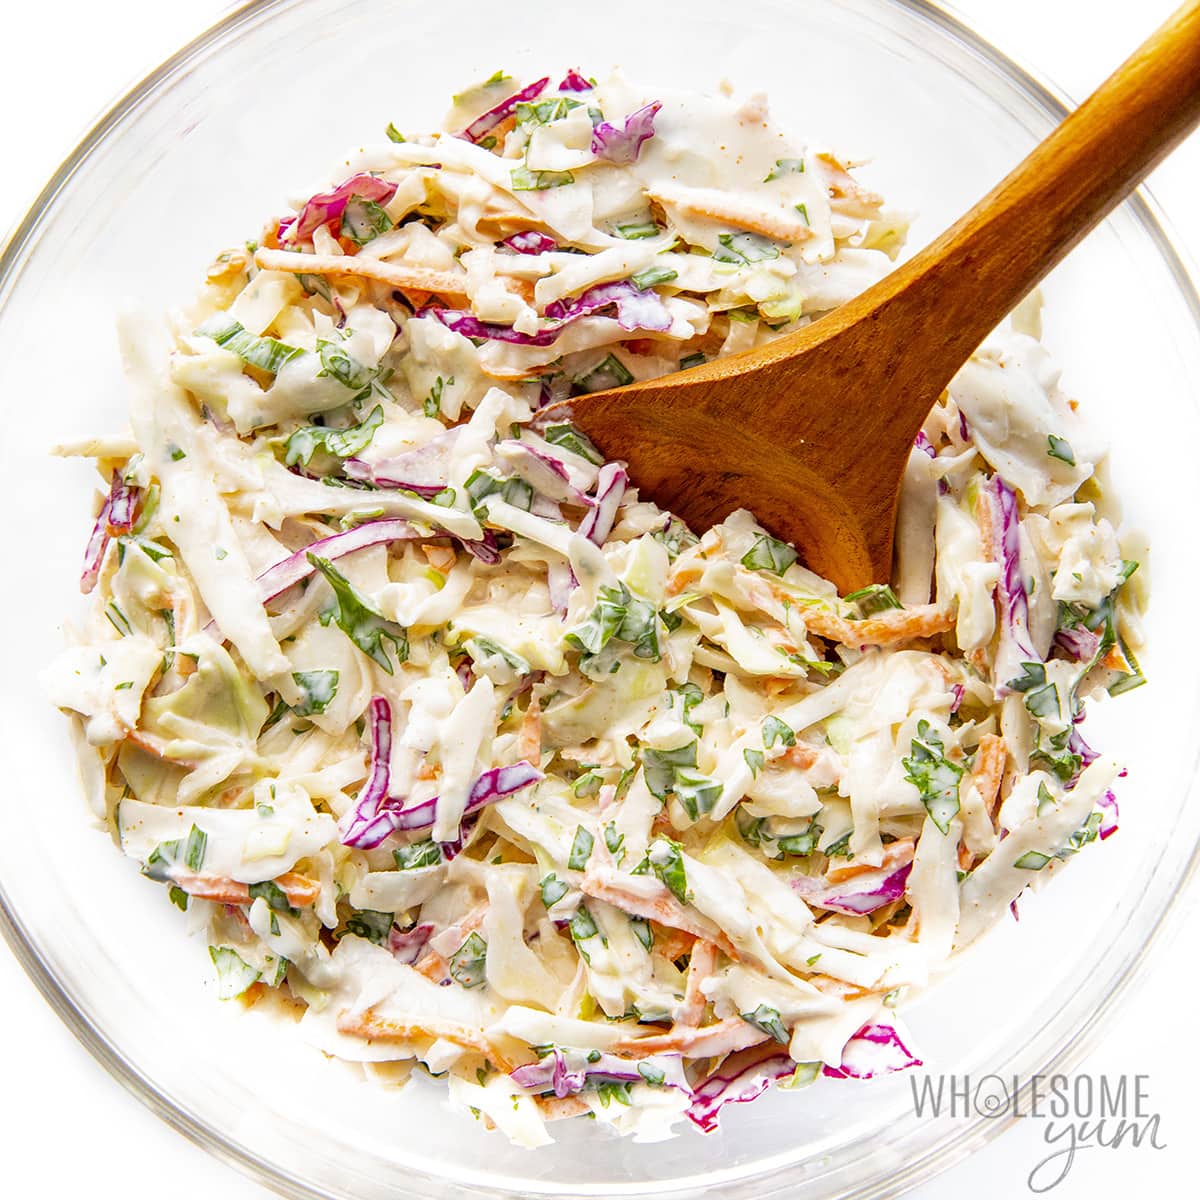 Mexican coleslaw tossed with dressing.